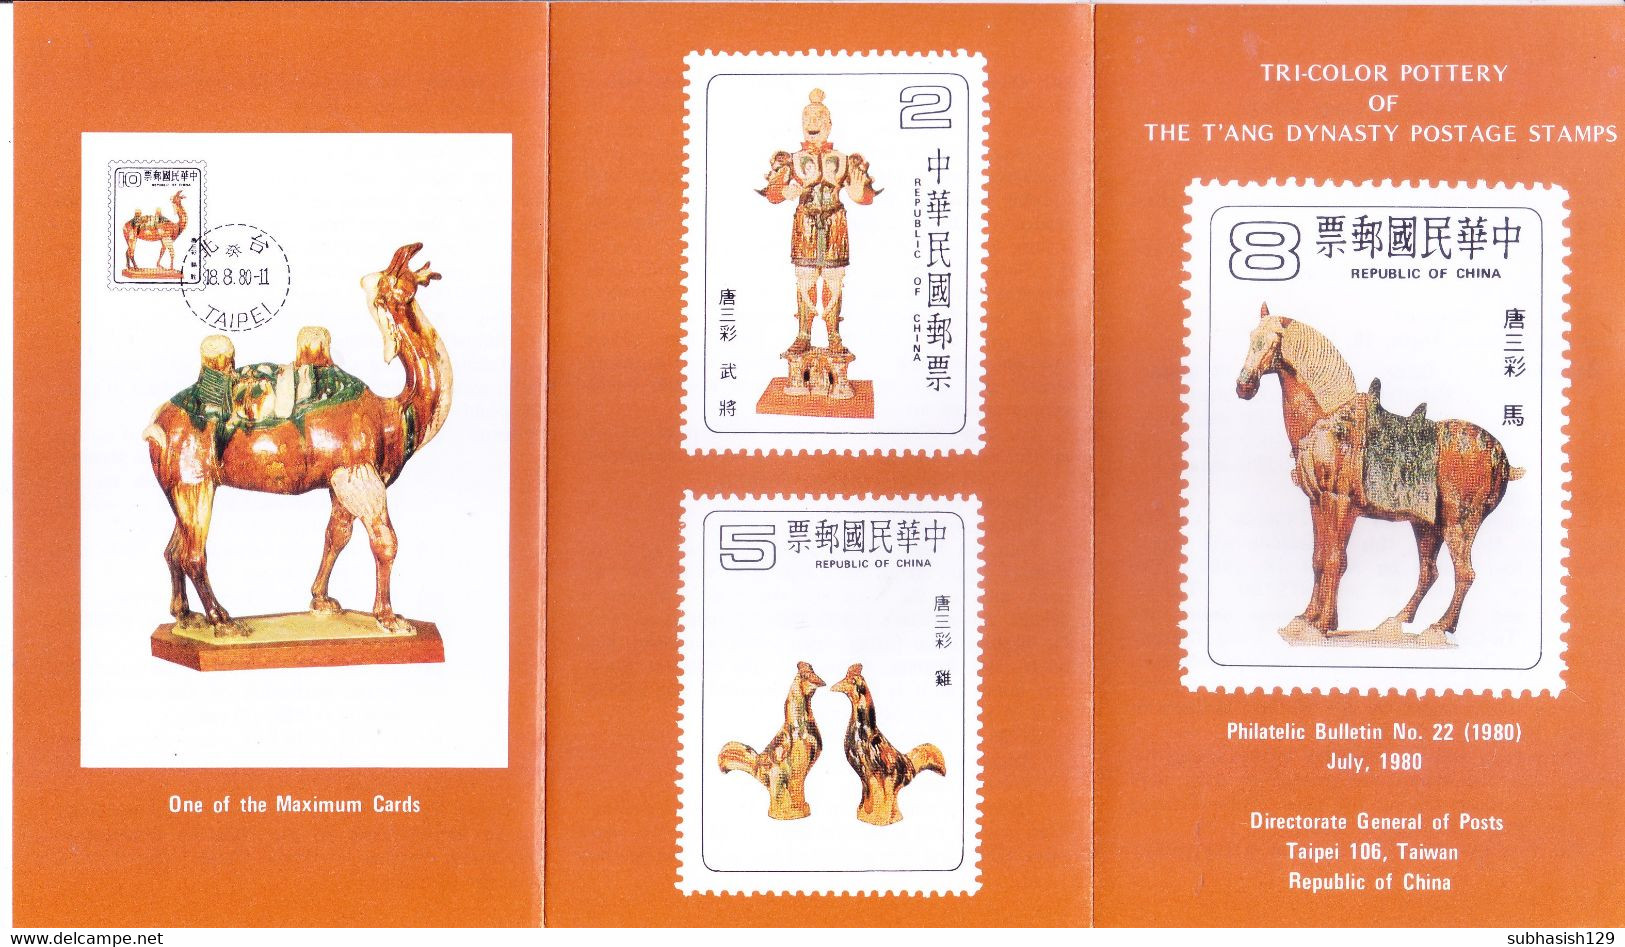 CHINA : FIRST DAY COVER WITH INFORMATION SHEET : 18 AUGUST 1980 : SET OF 4 : TRI COLOUR POTTERY : COMMERCIALLY USED - Storia Postale